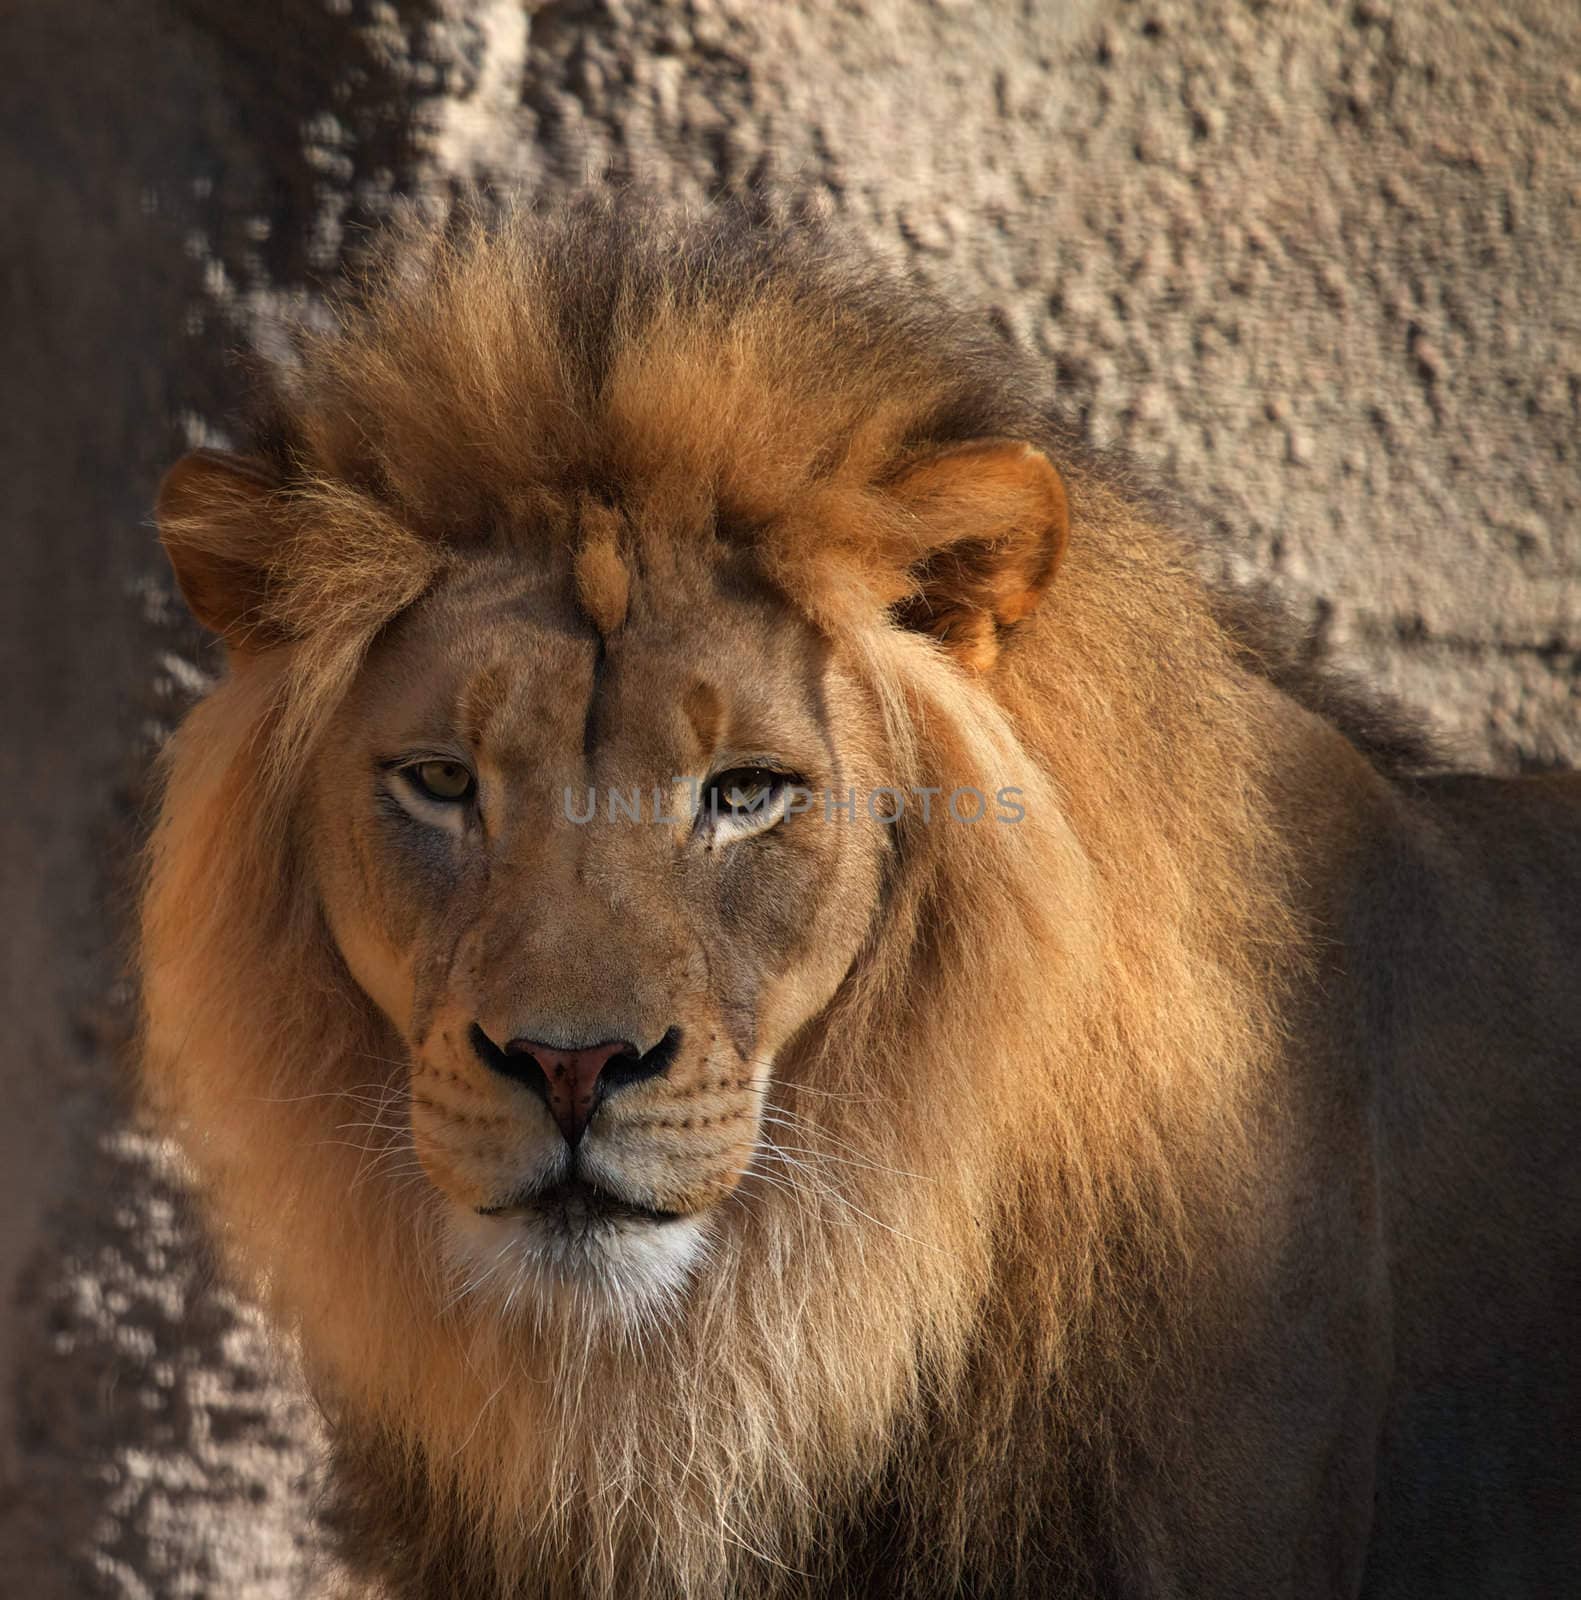 Large male Lions head looking at camera with soft background